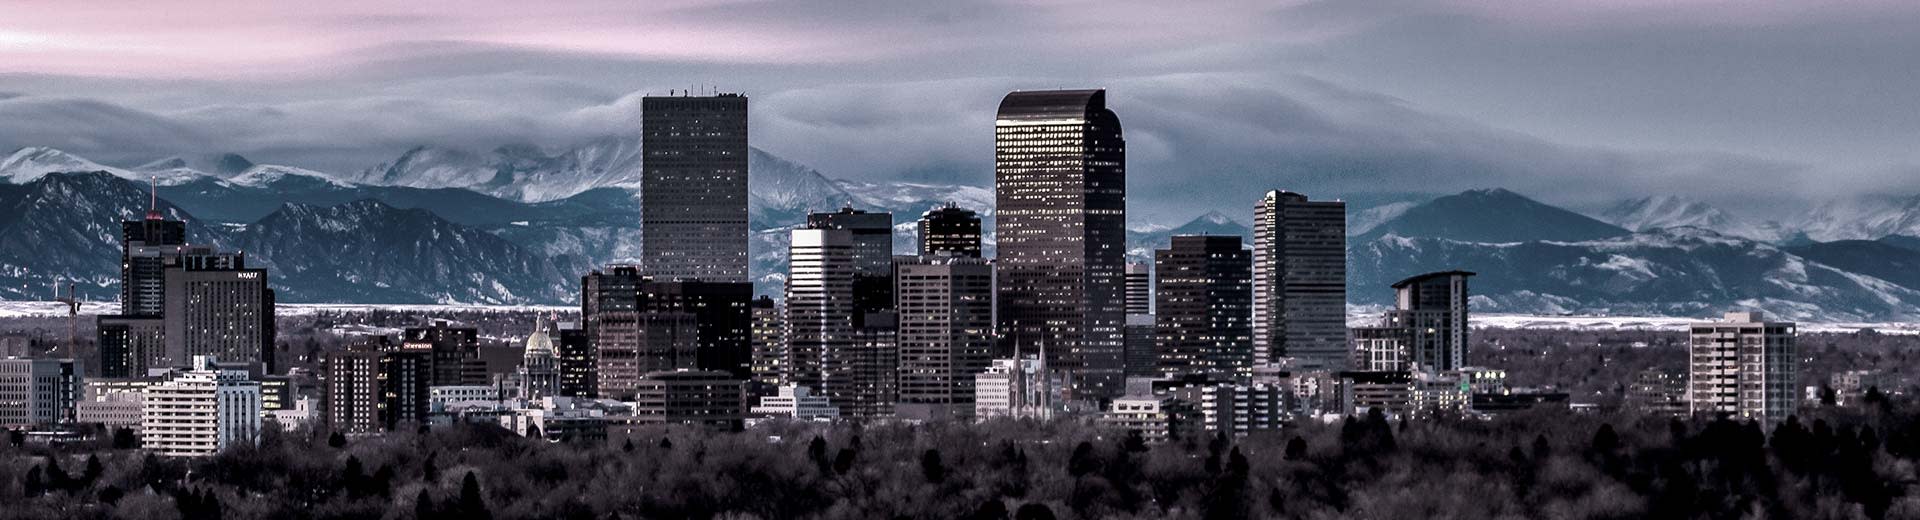 The city of Denver, with the Rocky Mountains in the background and skyscrapers to the fore.